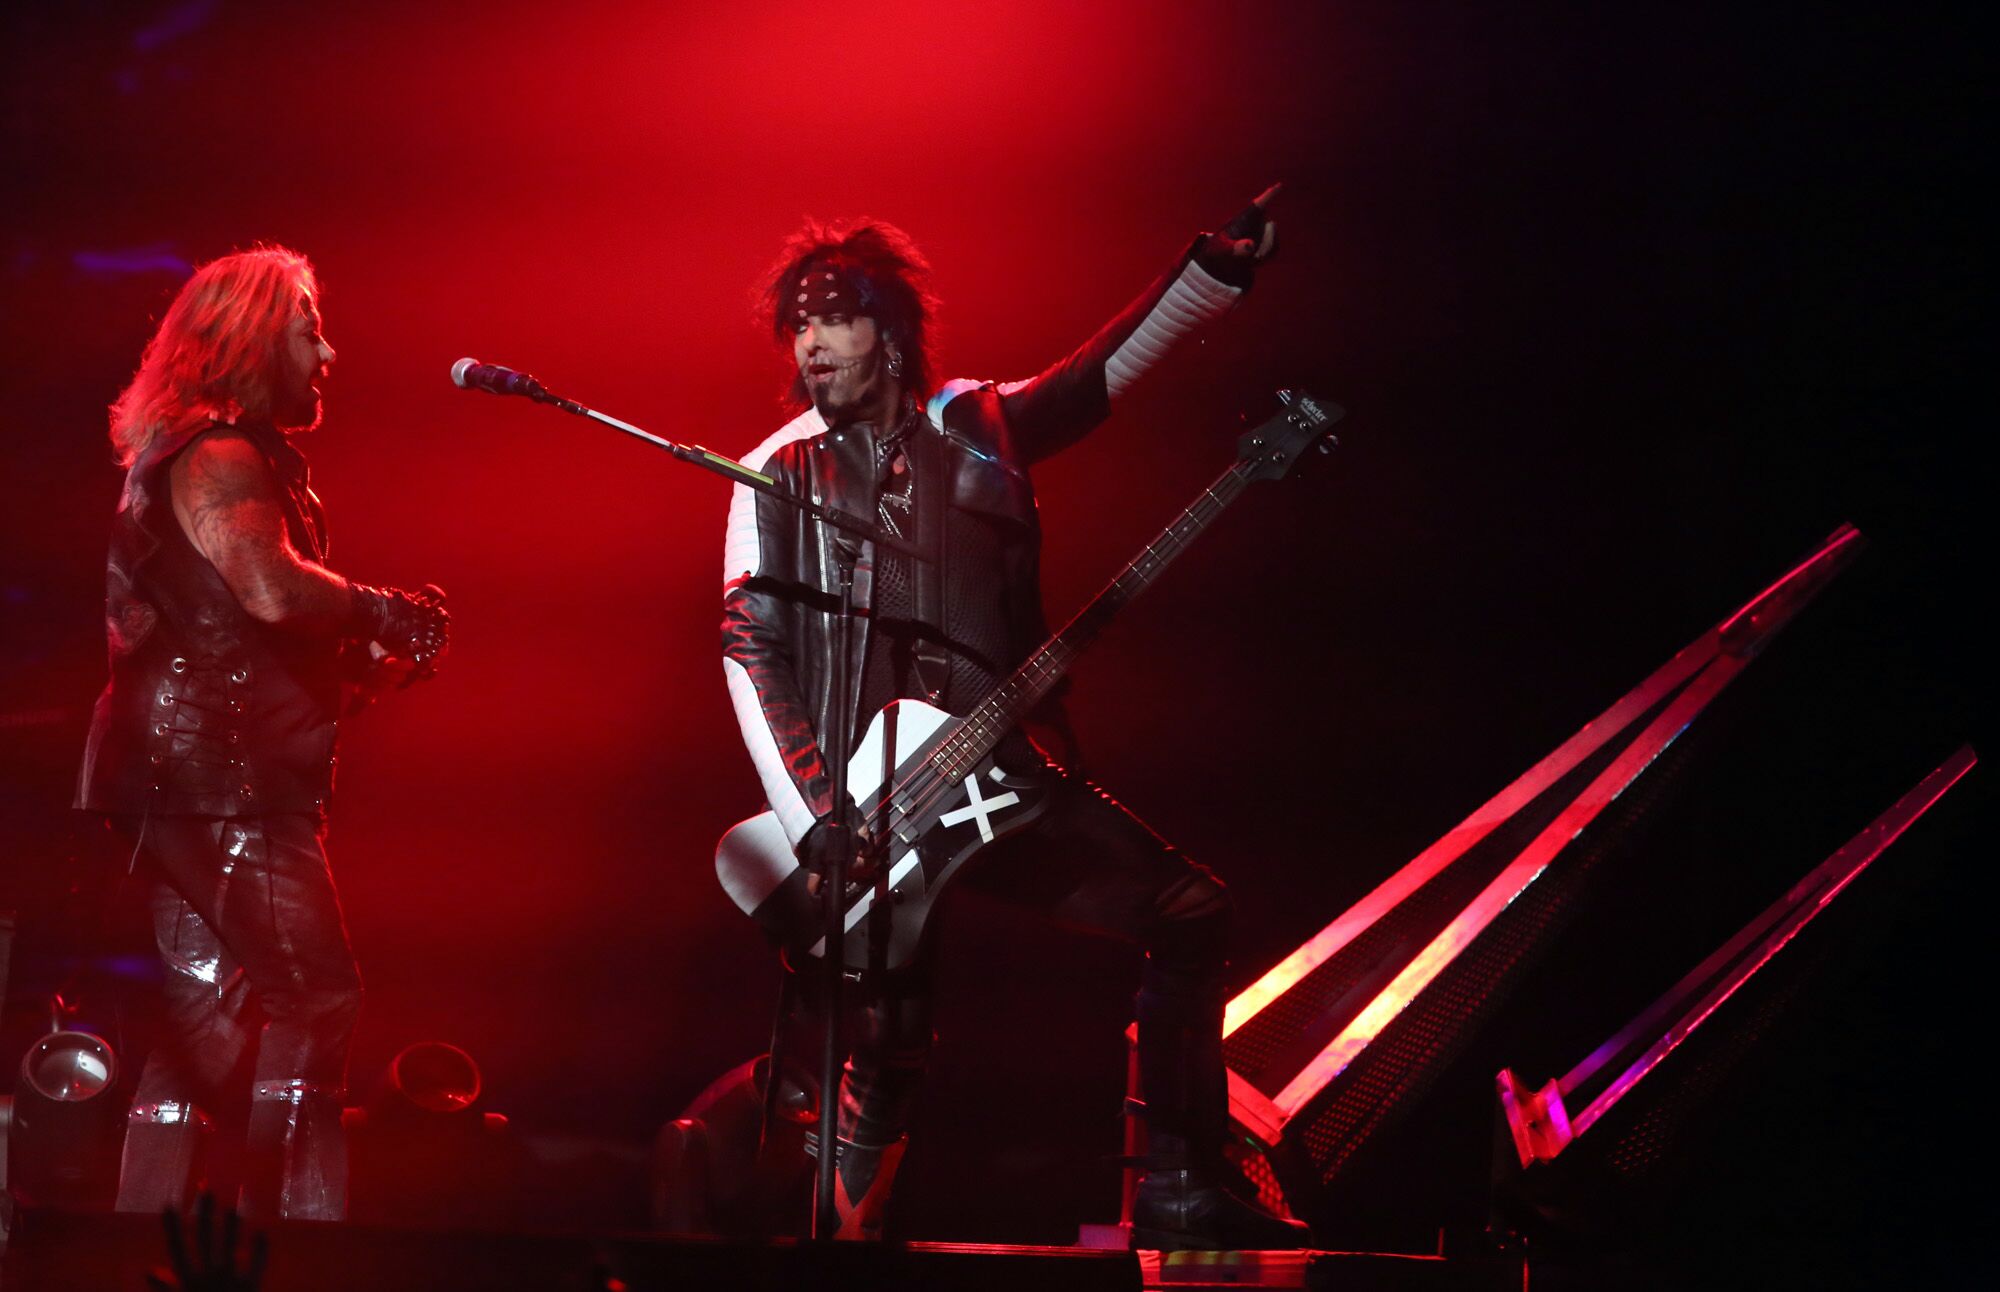 Vince Neil, left, and Nikki Sixx perform with Motley Crue at the Matthew Knight Arena in Eugene, Oregon, on July 22, 2015.